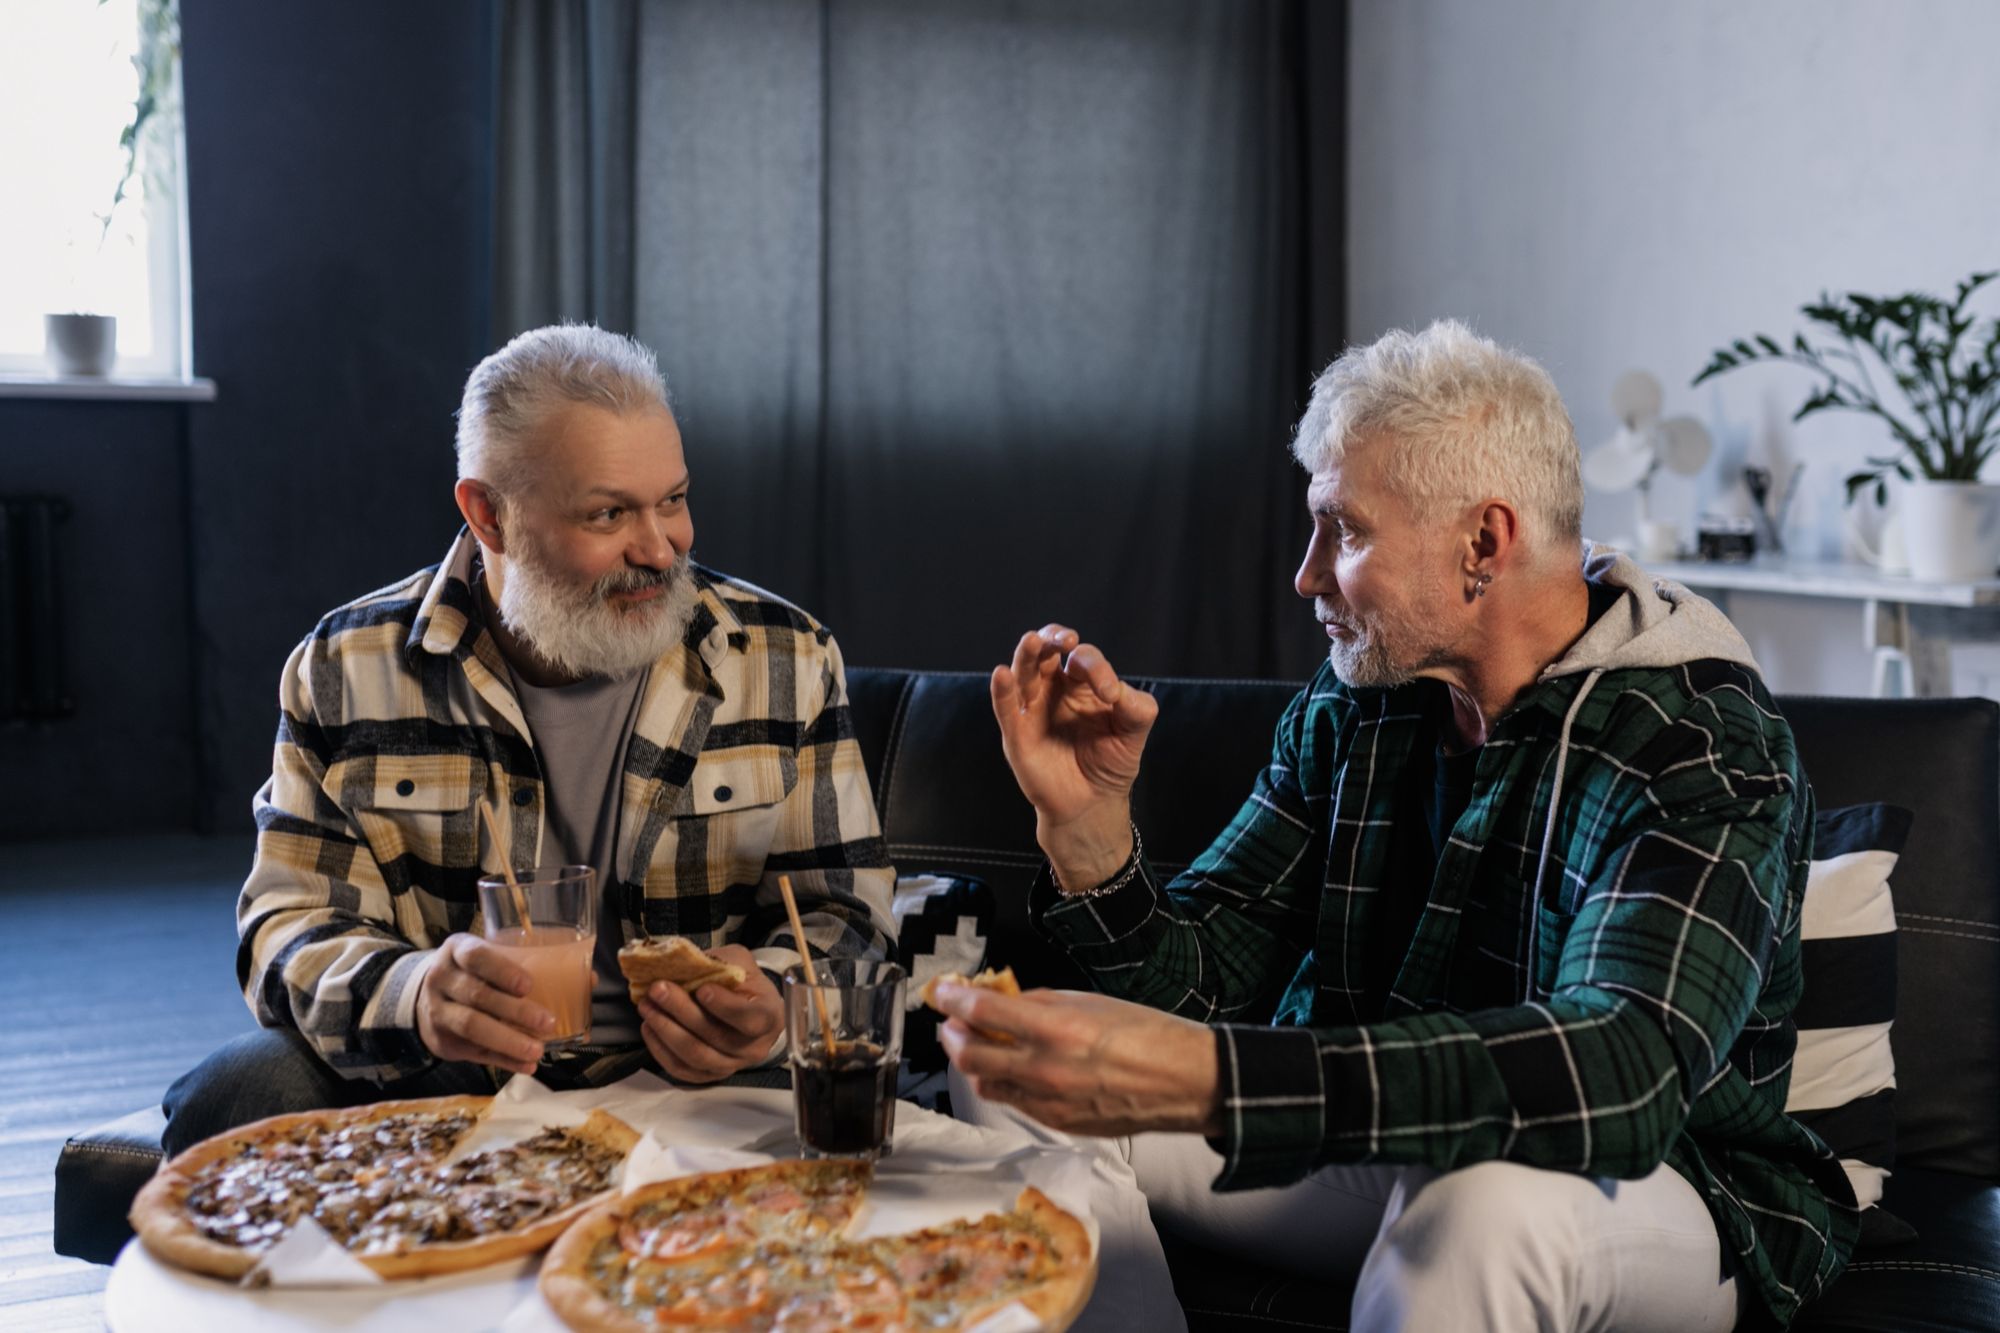 two men eating pizza